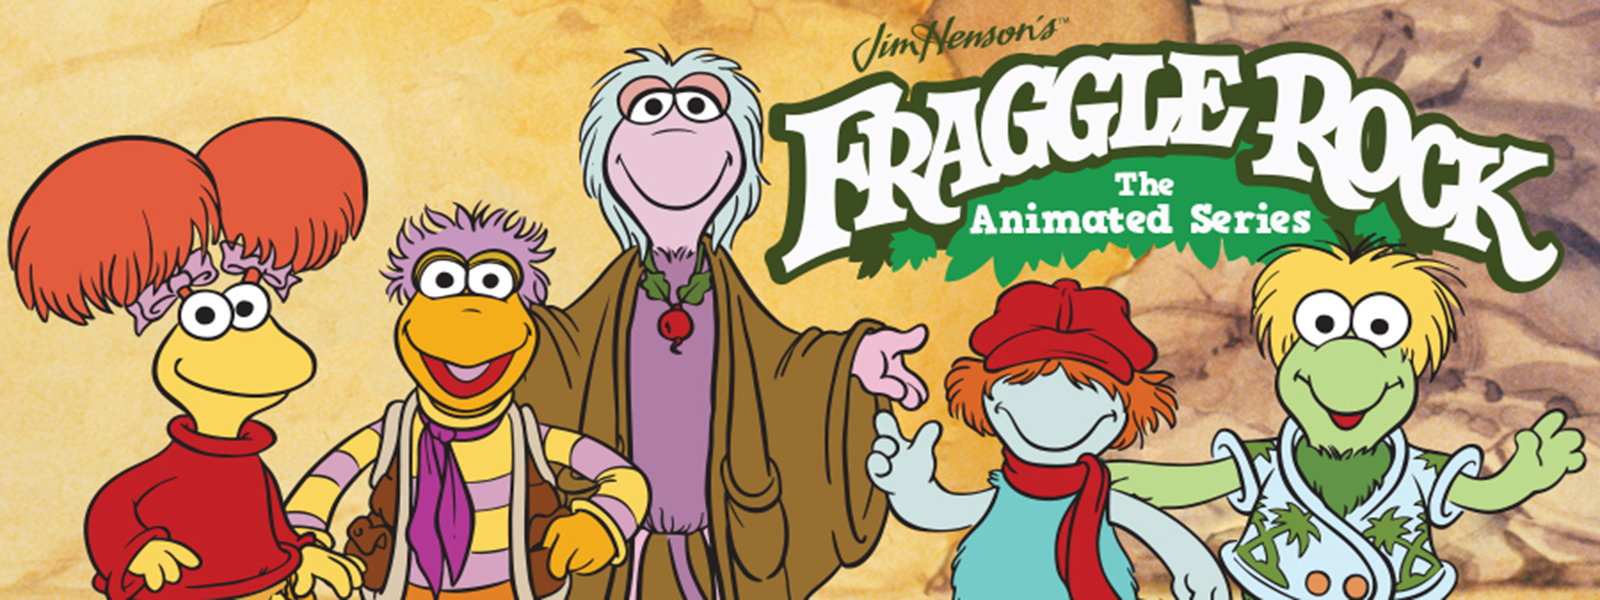 Fraggle Rock: The Animated Series